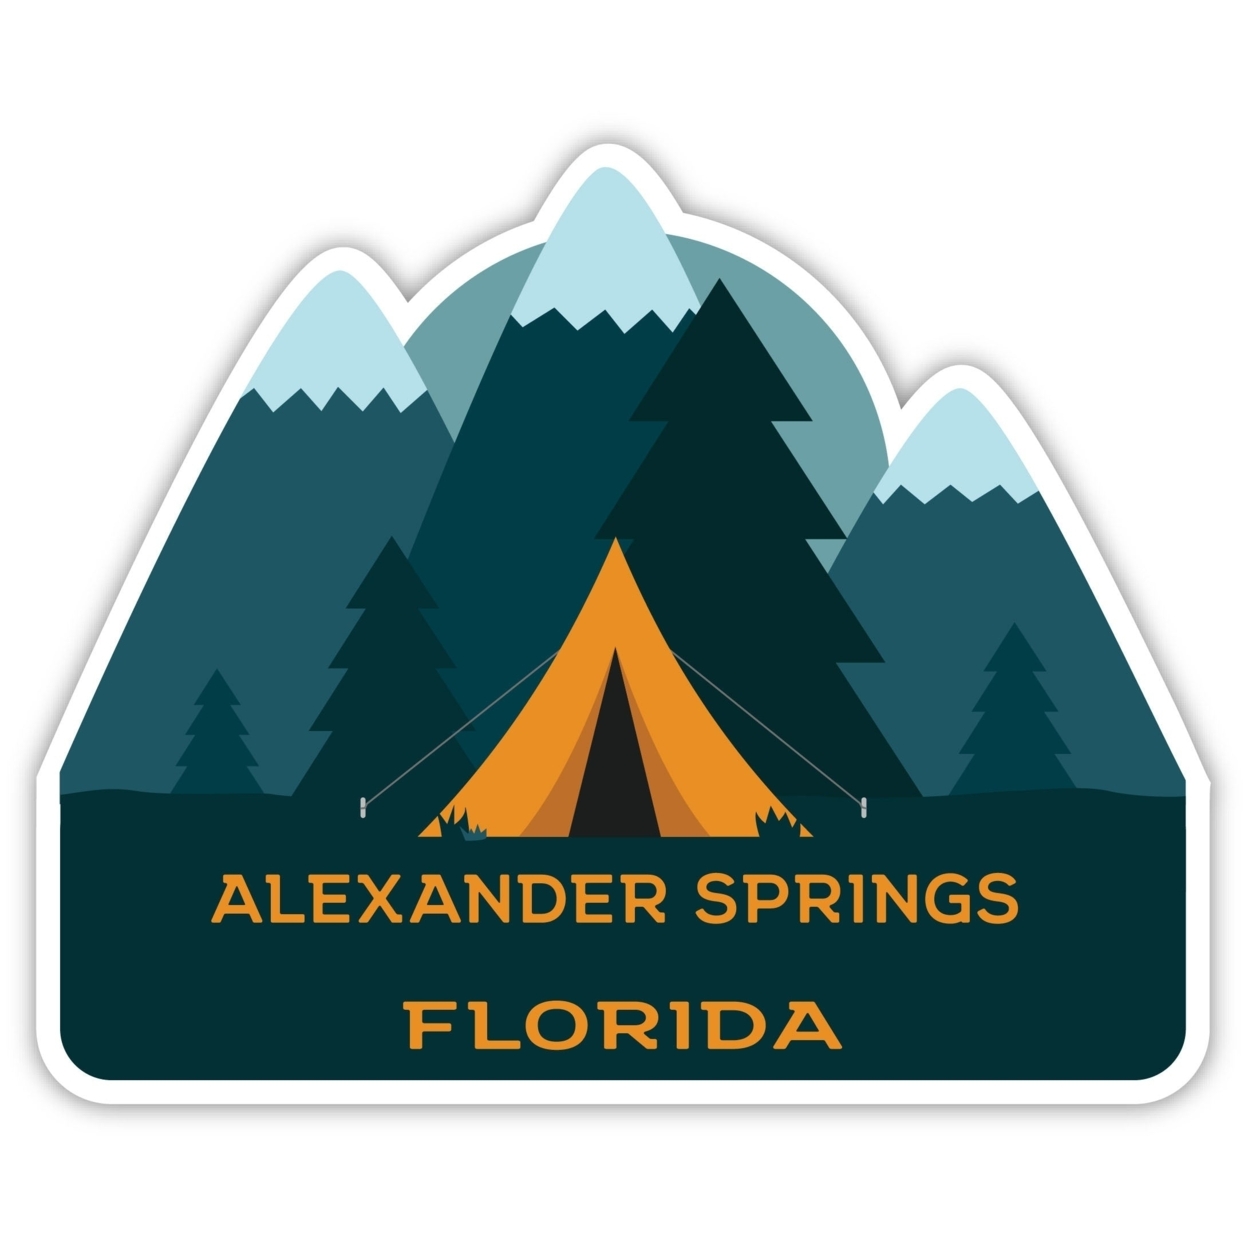 Alexander Springs Florida Souvenir Decorative Stickers (Choose Theme And Size) - 4-Pack, 4-Inch, Tent